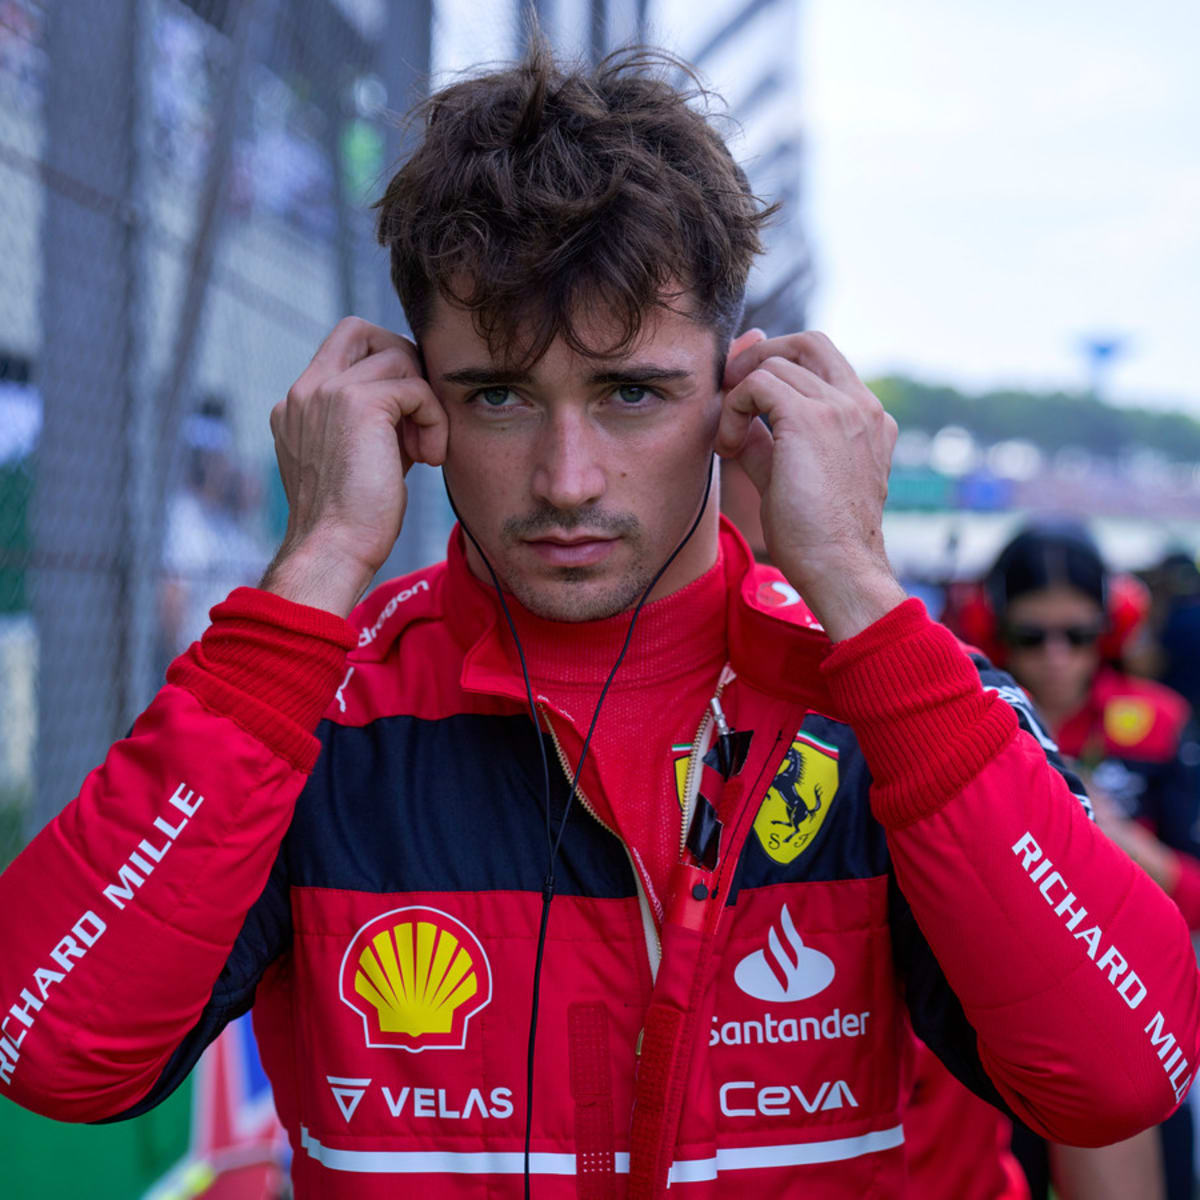 F1 News: Charles Leclerc's Insane New Addition To His Garage Revealed - F1  Briefings: Formula 1 News, Rumors, Standings and More